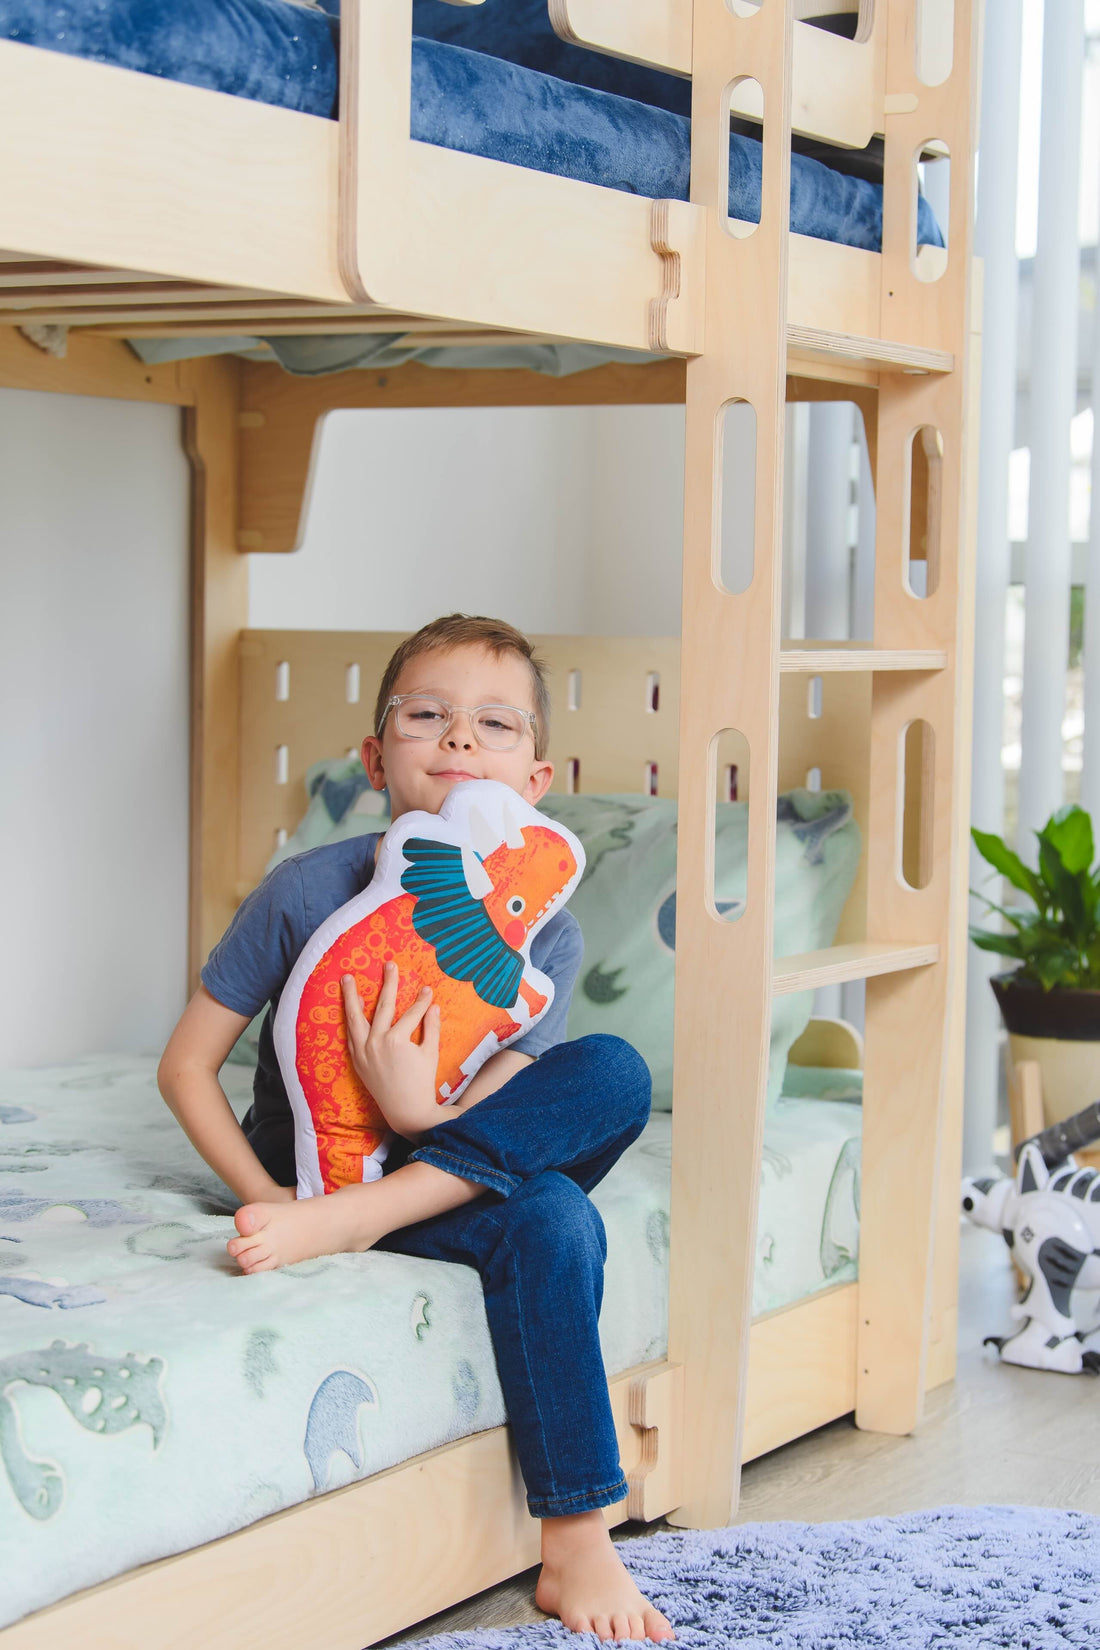 Enhance your child's sleep! Explore key mattress choices and bed designs that support growth and imagination.